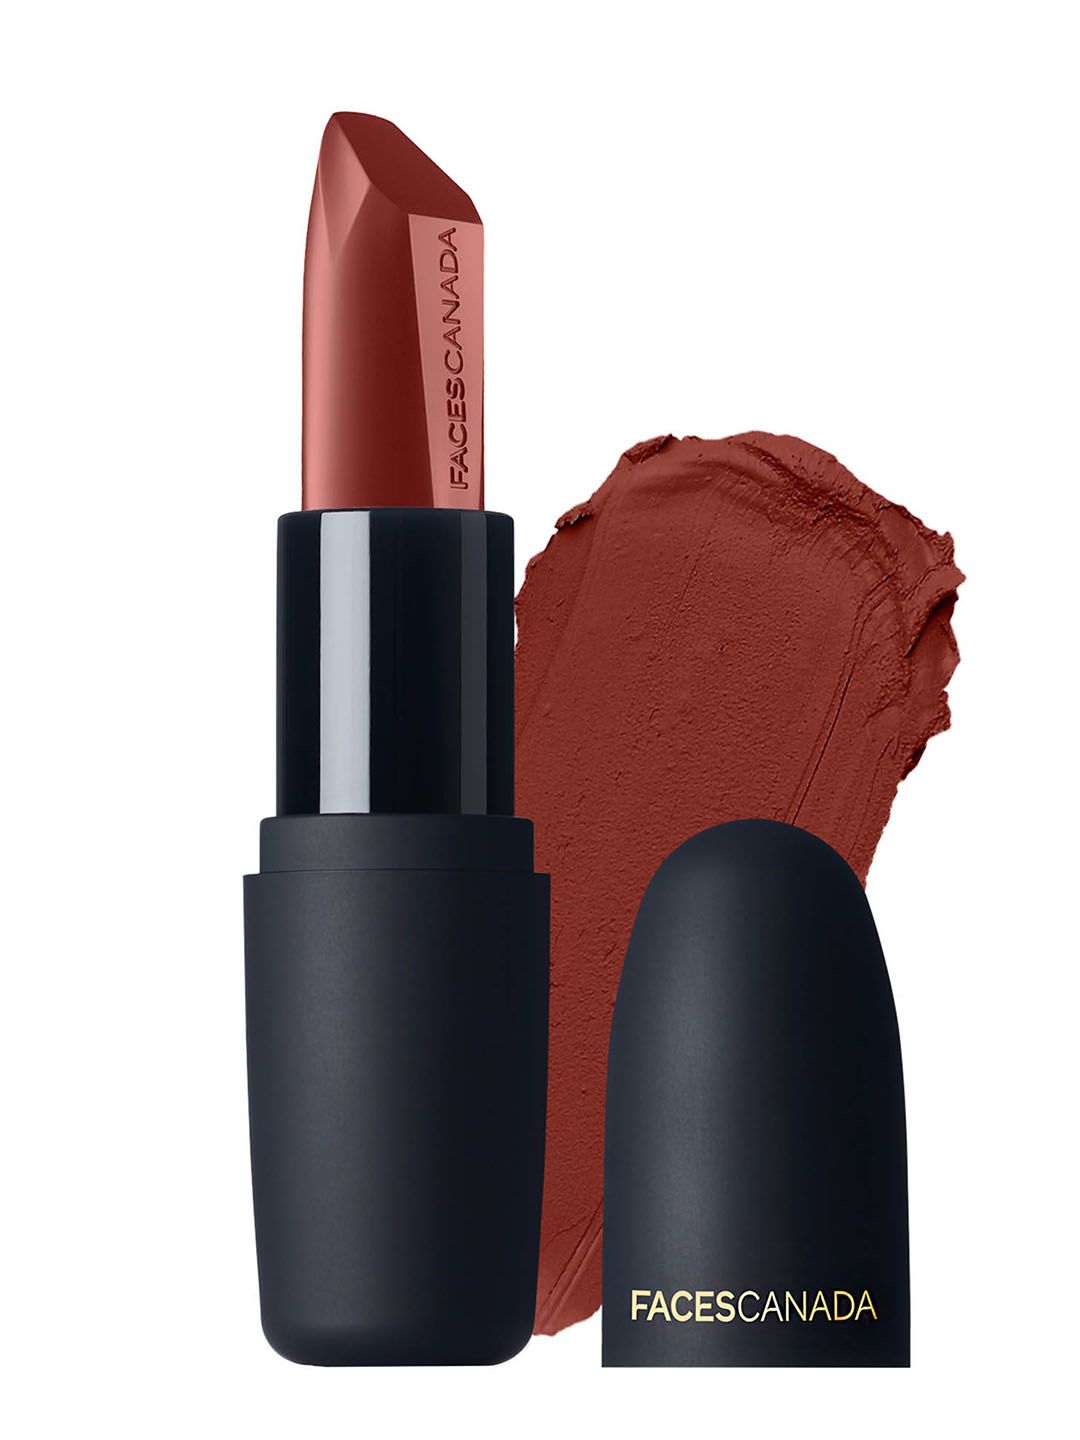 Faces Canada Weightless Matte Hydrating Lipstick with Almond Oil - Royal Maroon 16 Price in India